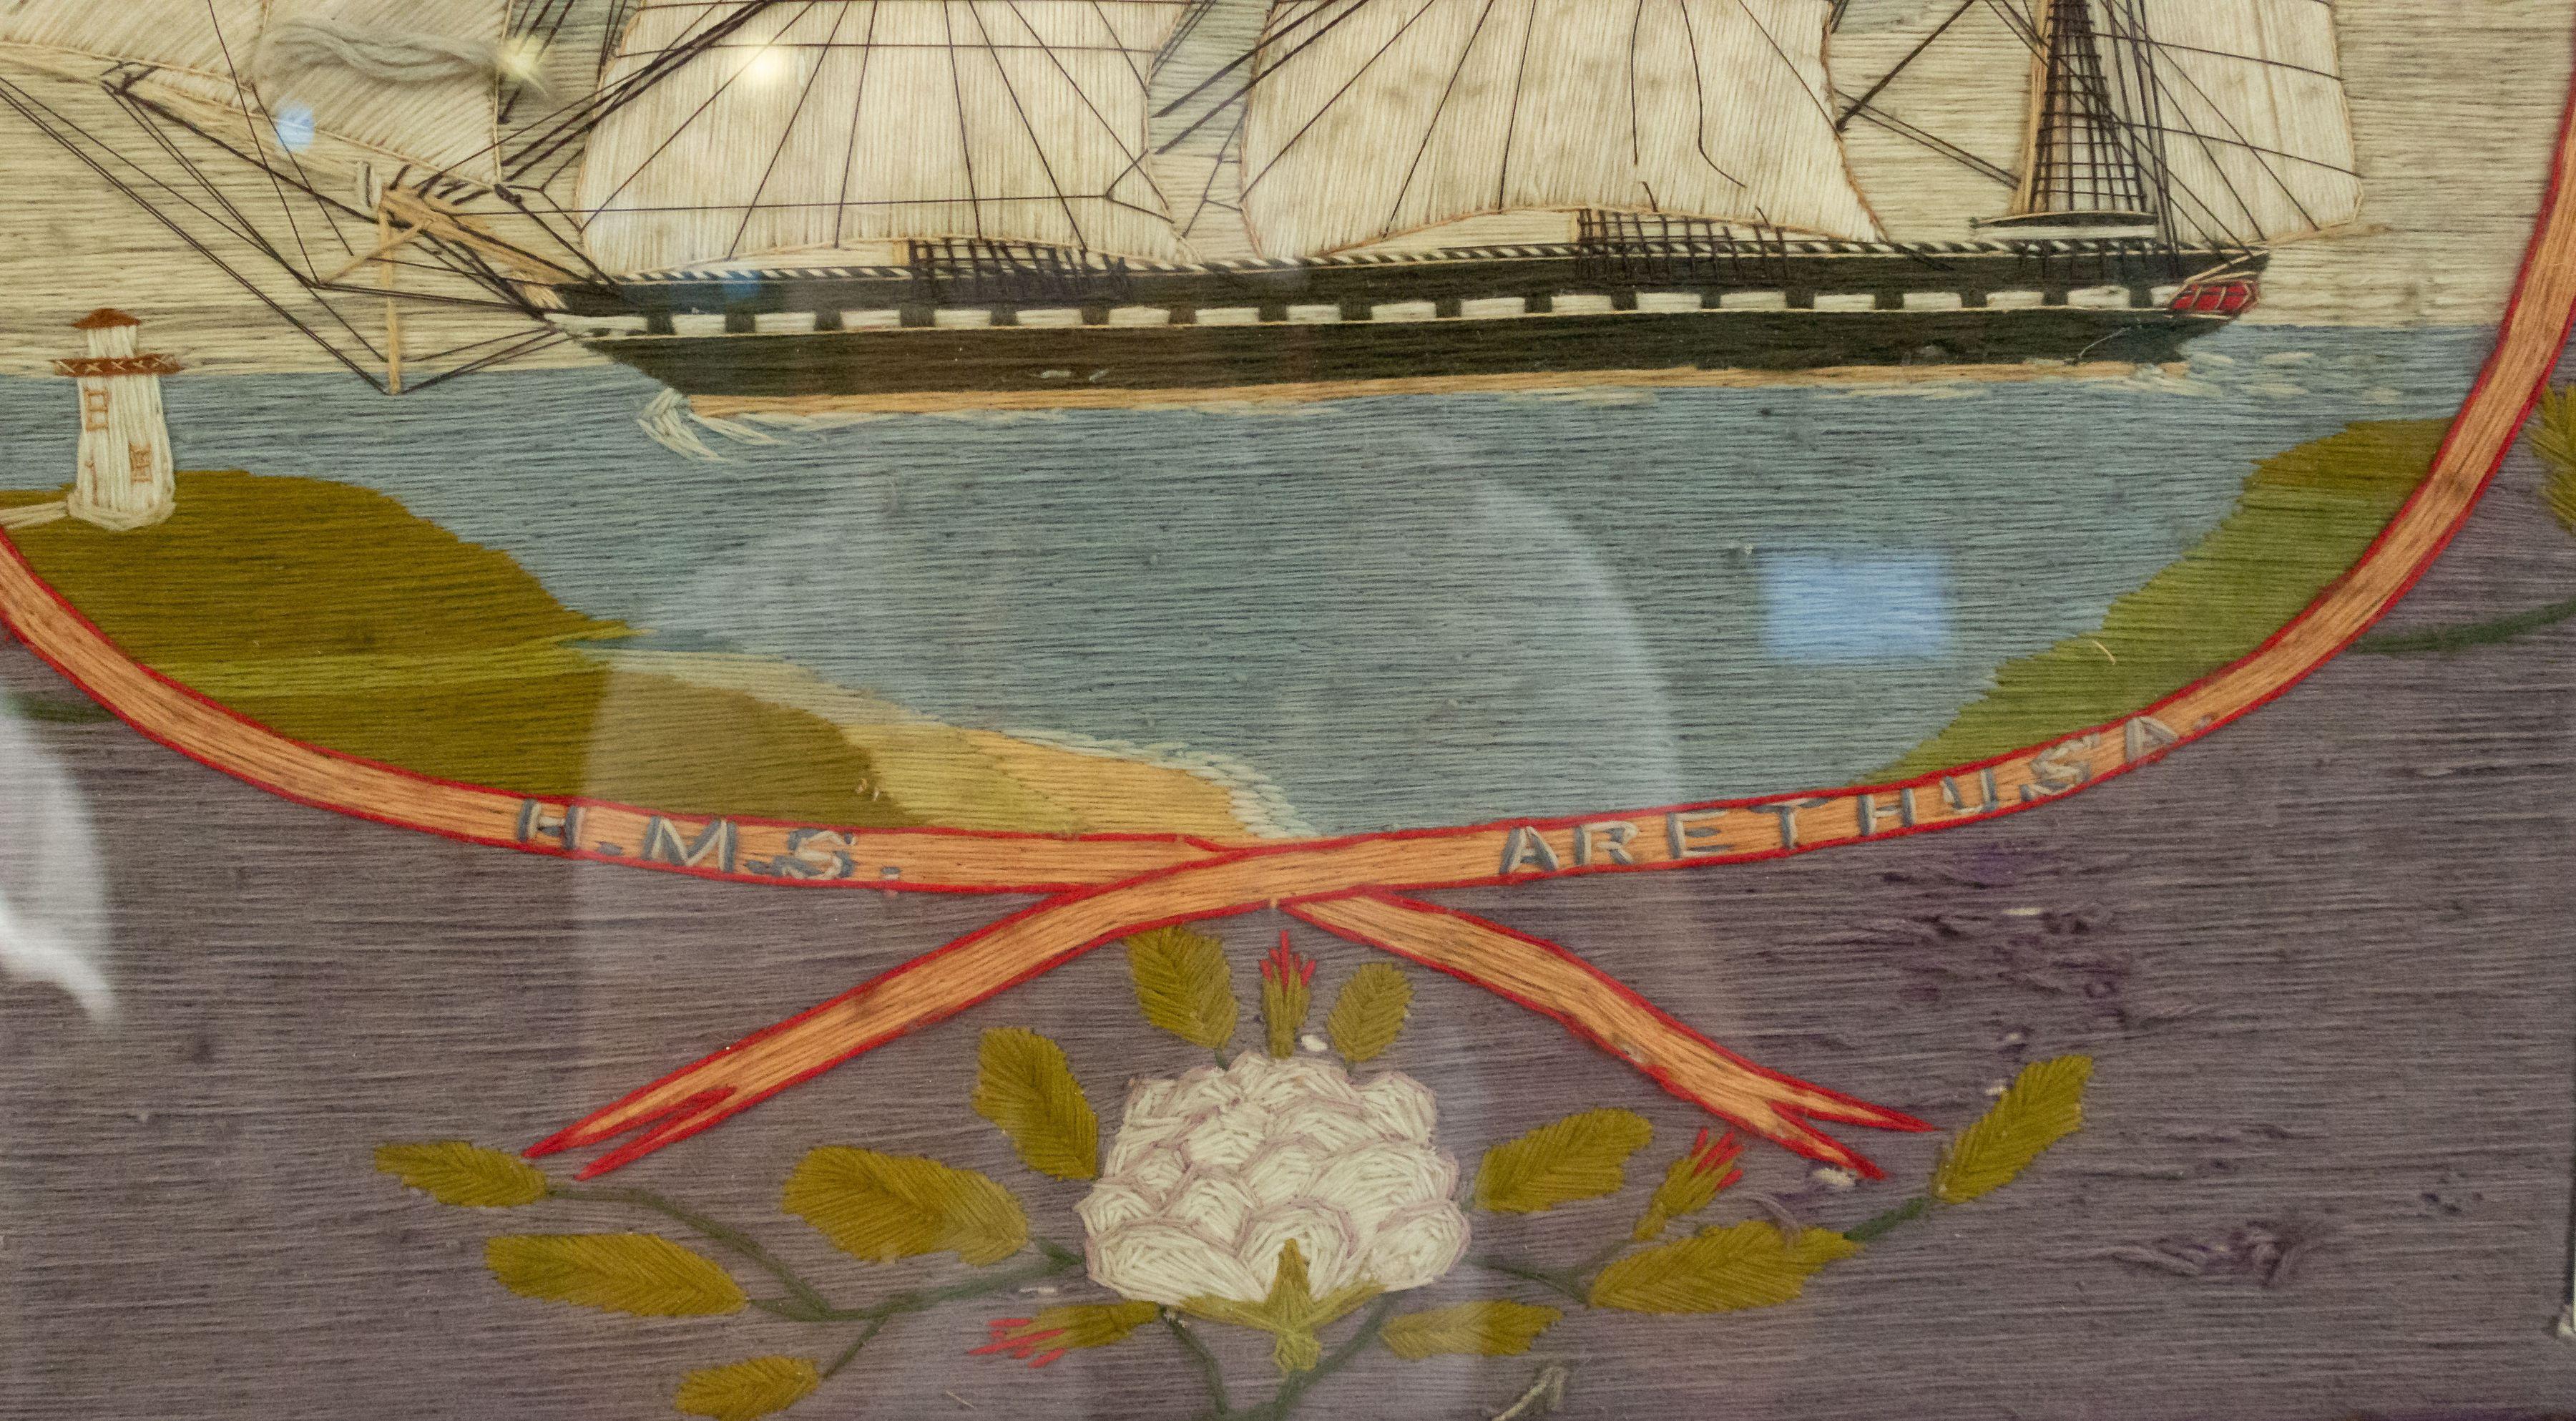 British English Victorian Framed Memorial Naval Ship Embroidery For Sale